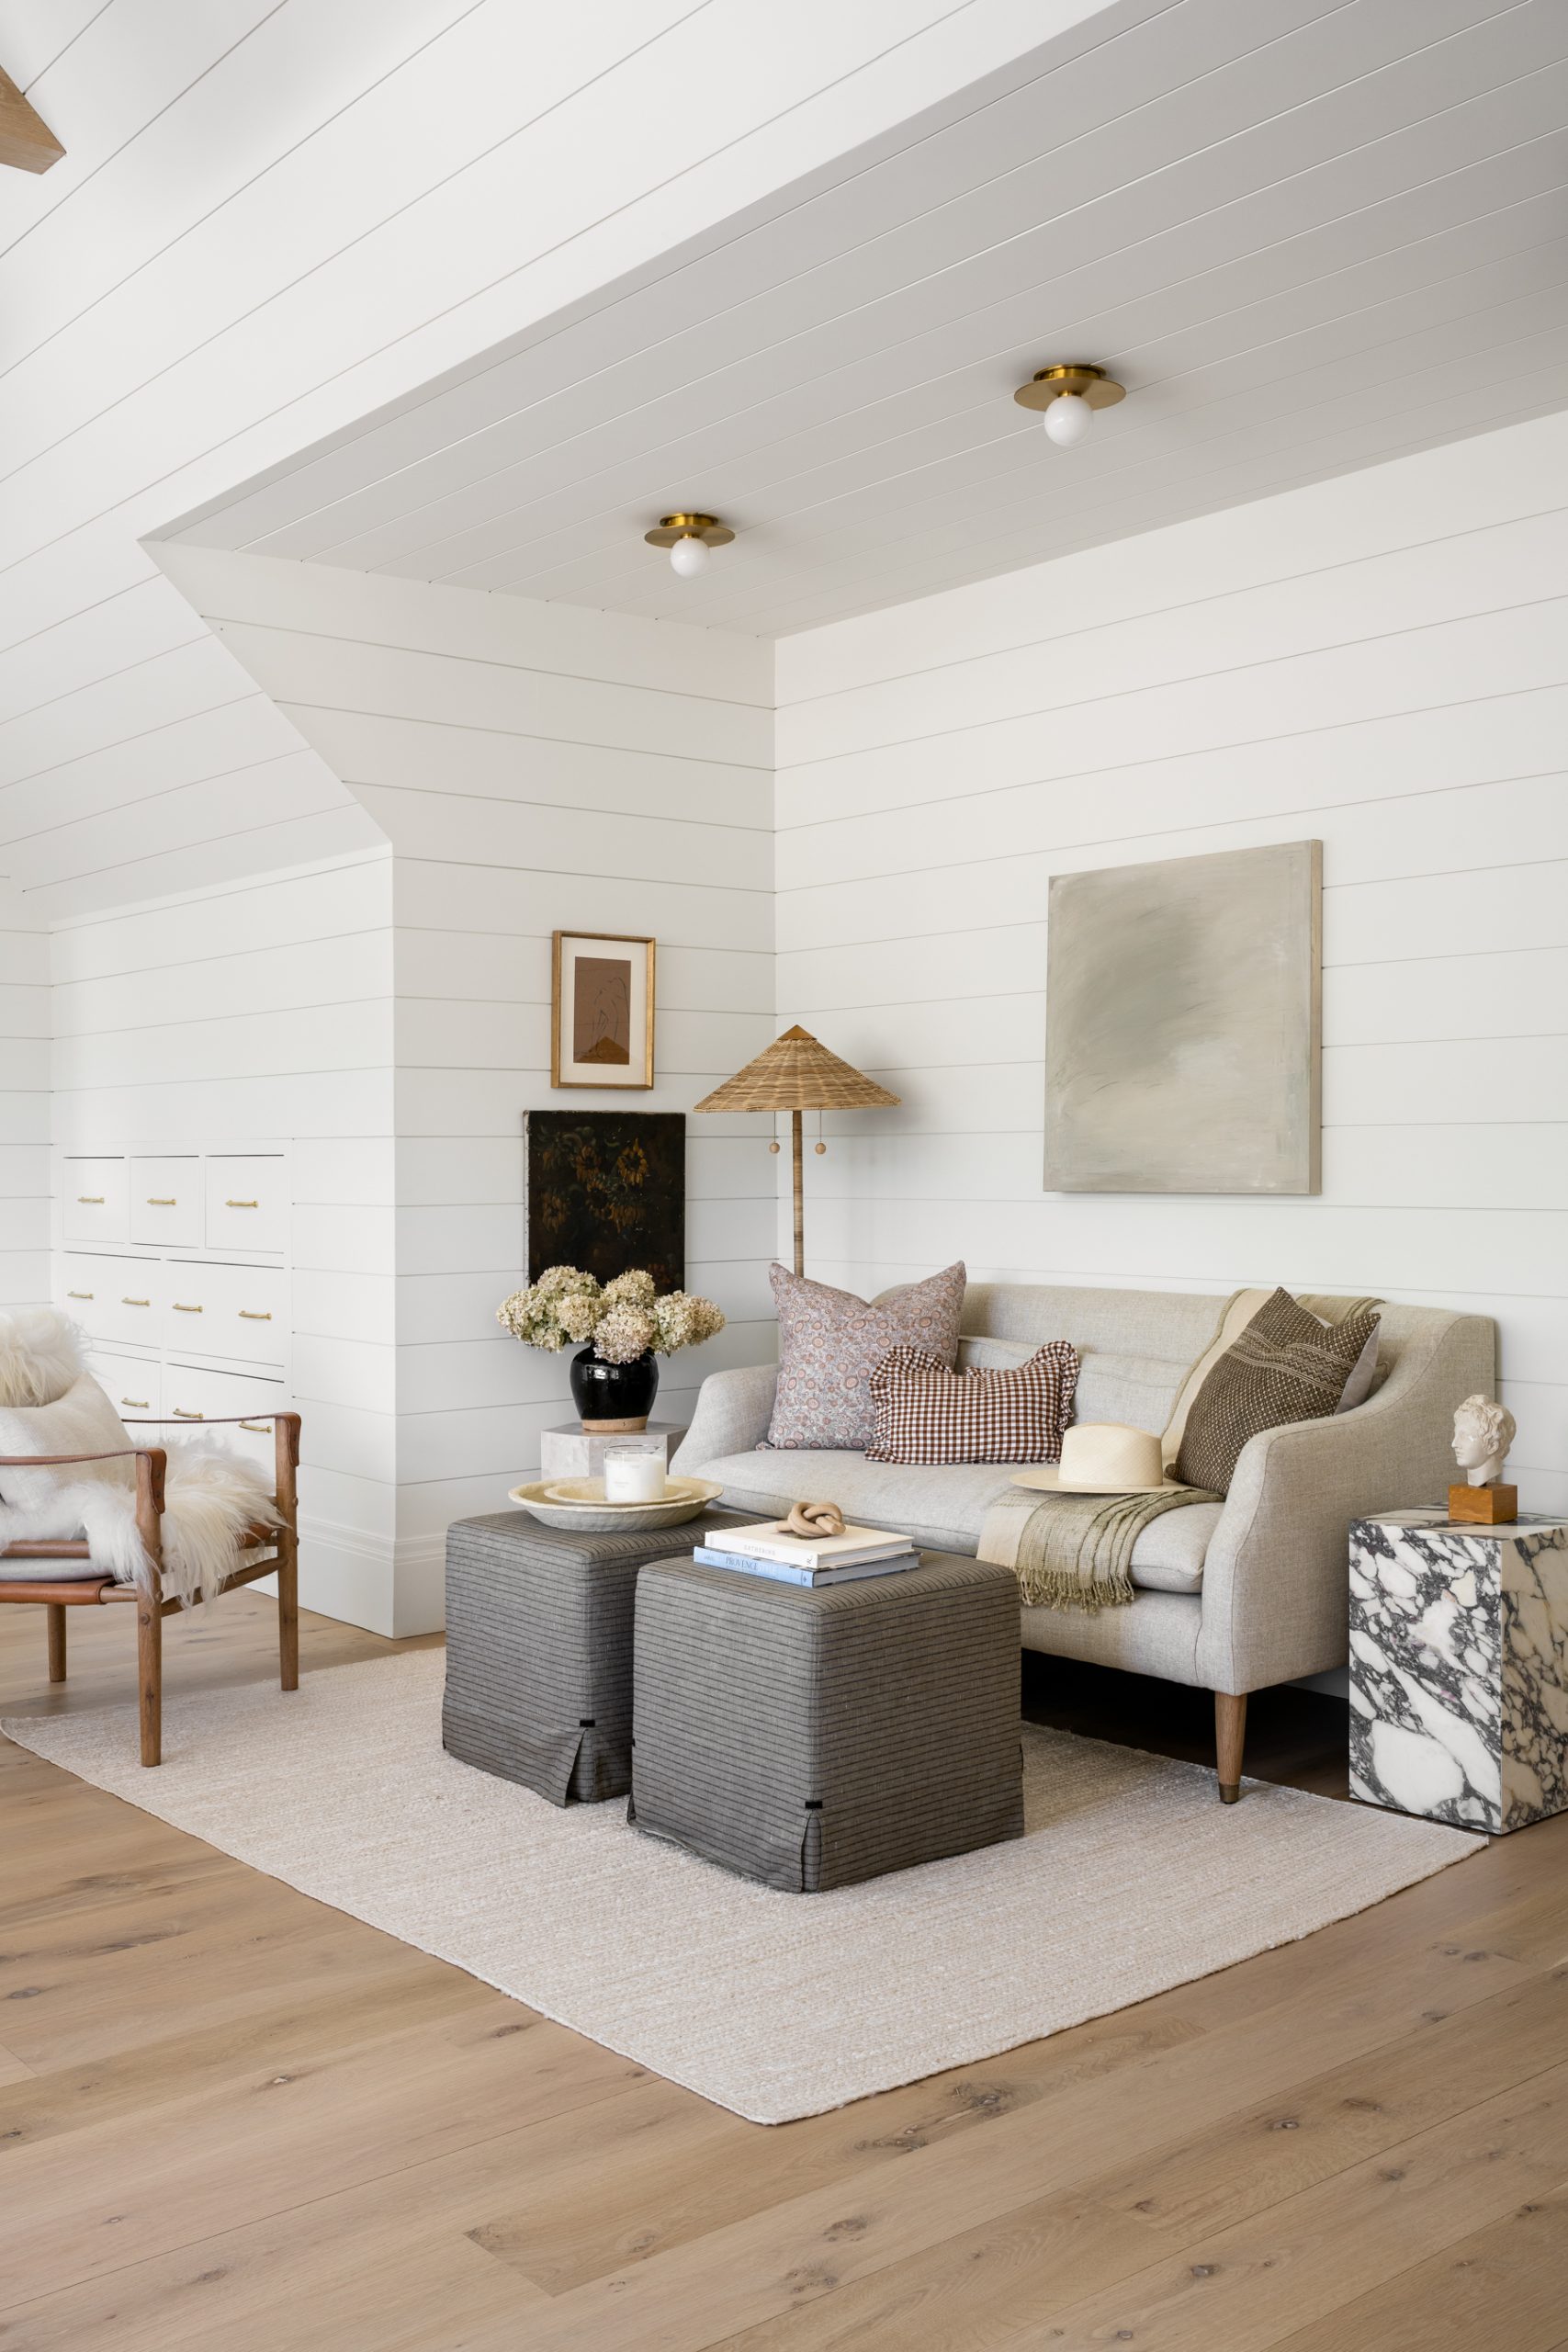 sitting area with sofa and white shiplap wall treatment